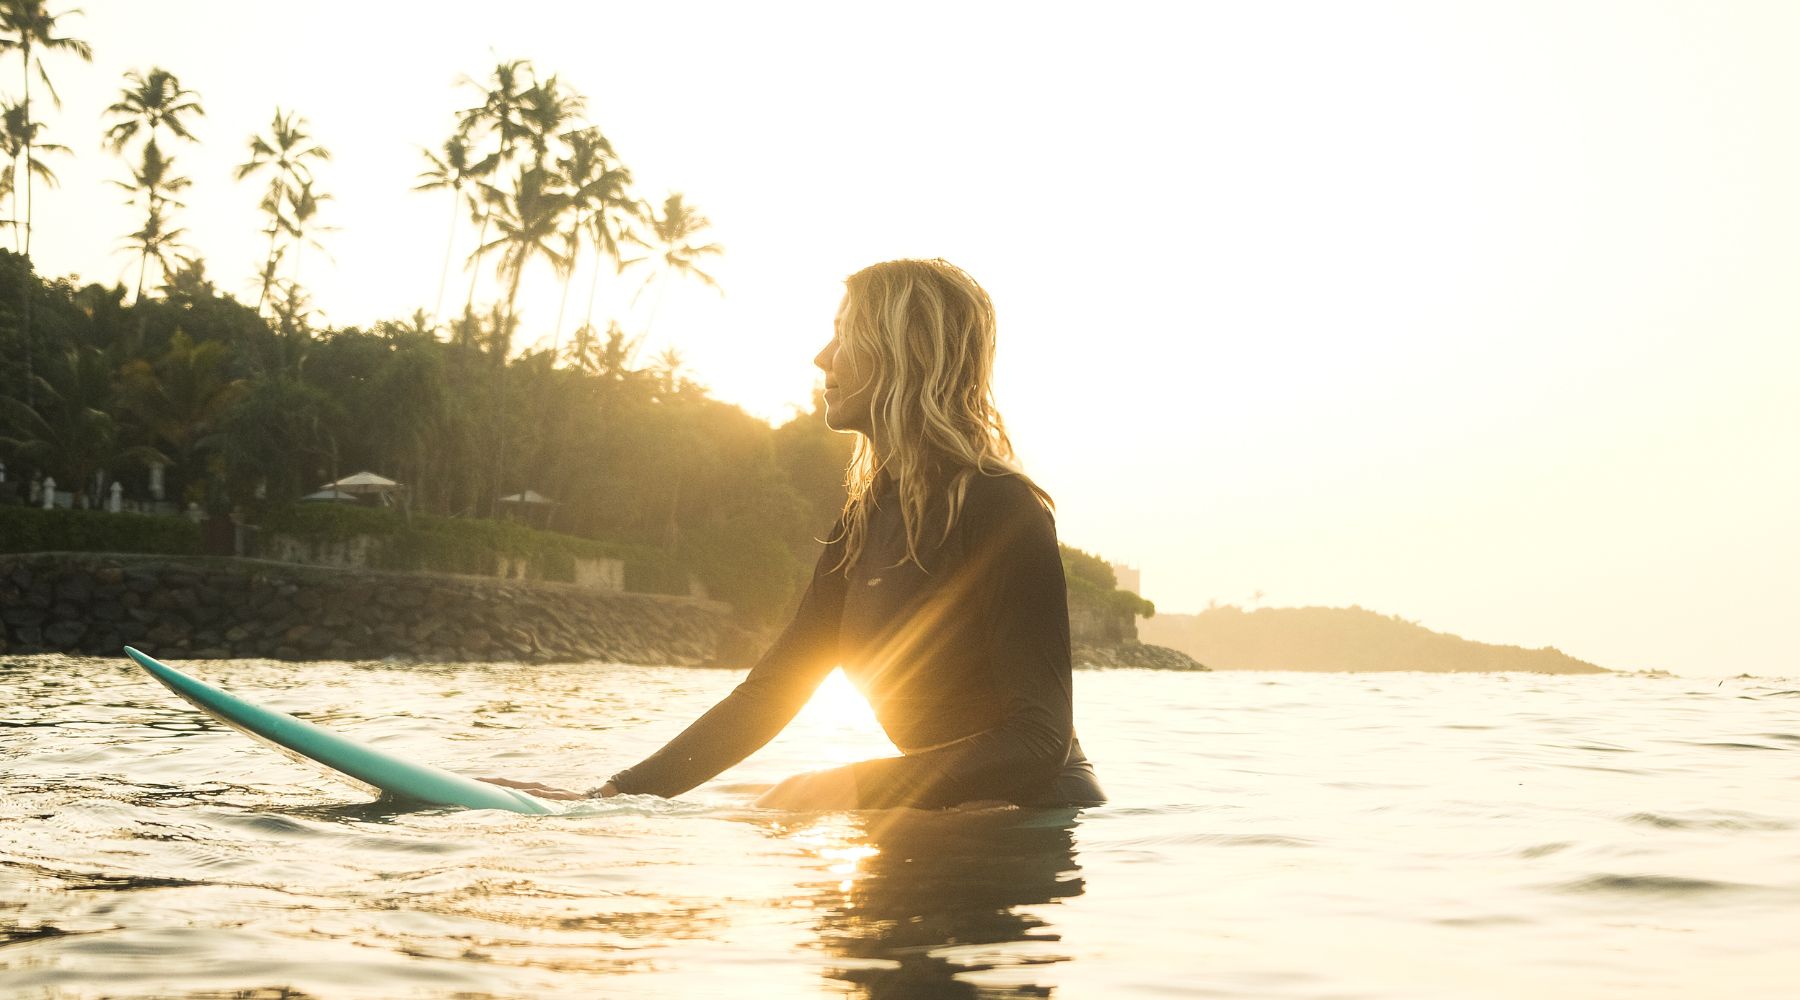 Surf Yoga with Ronja Müller